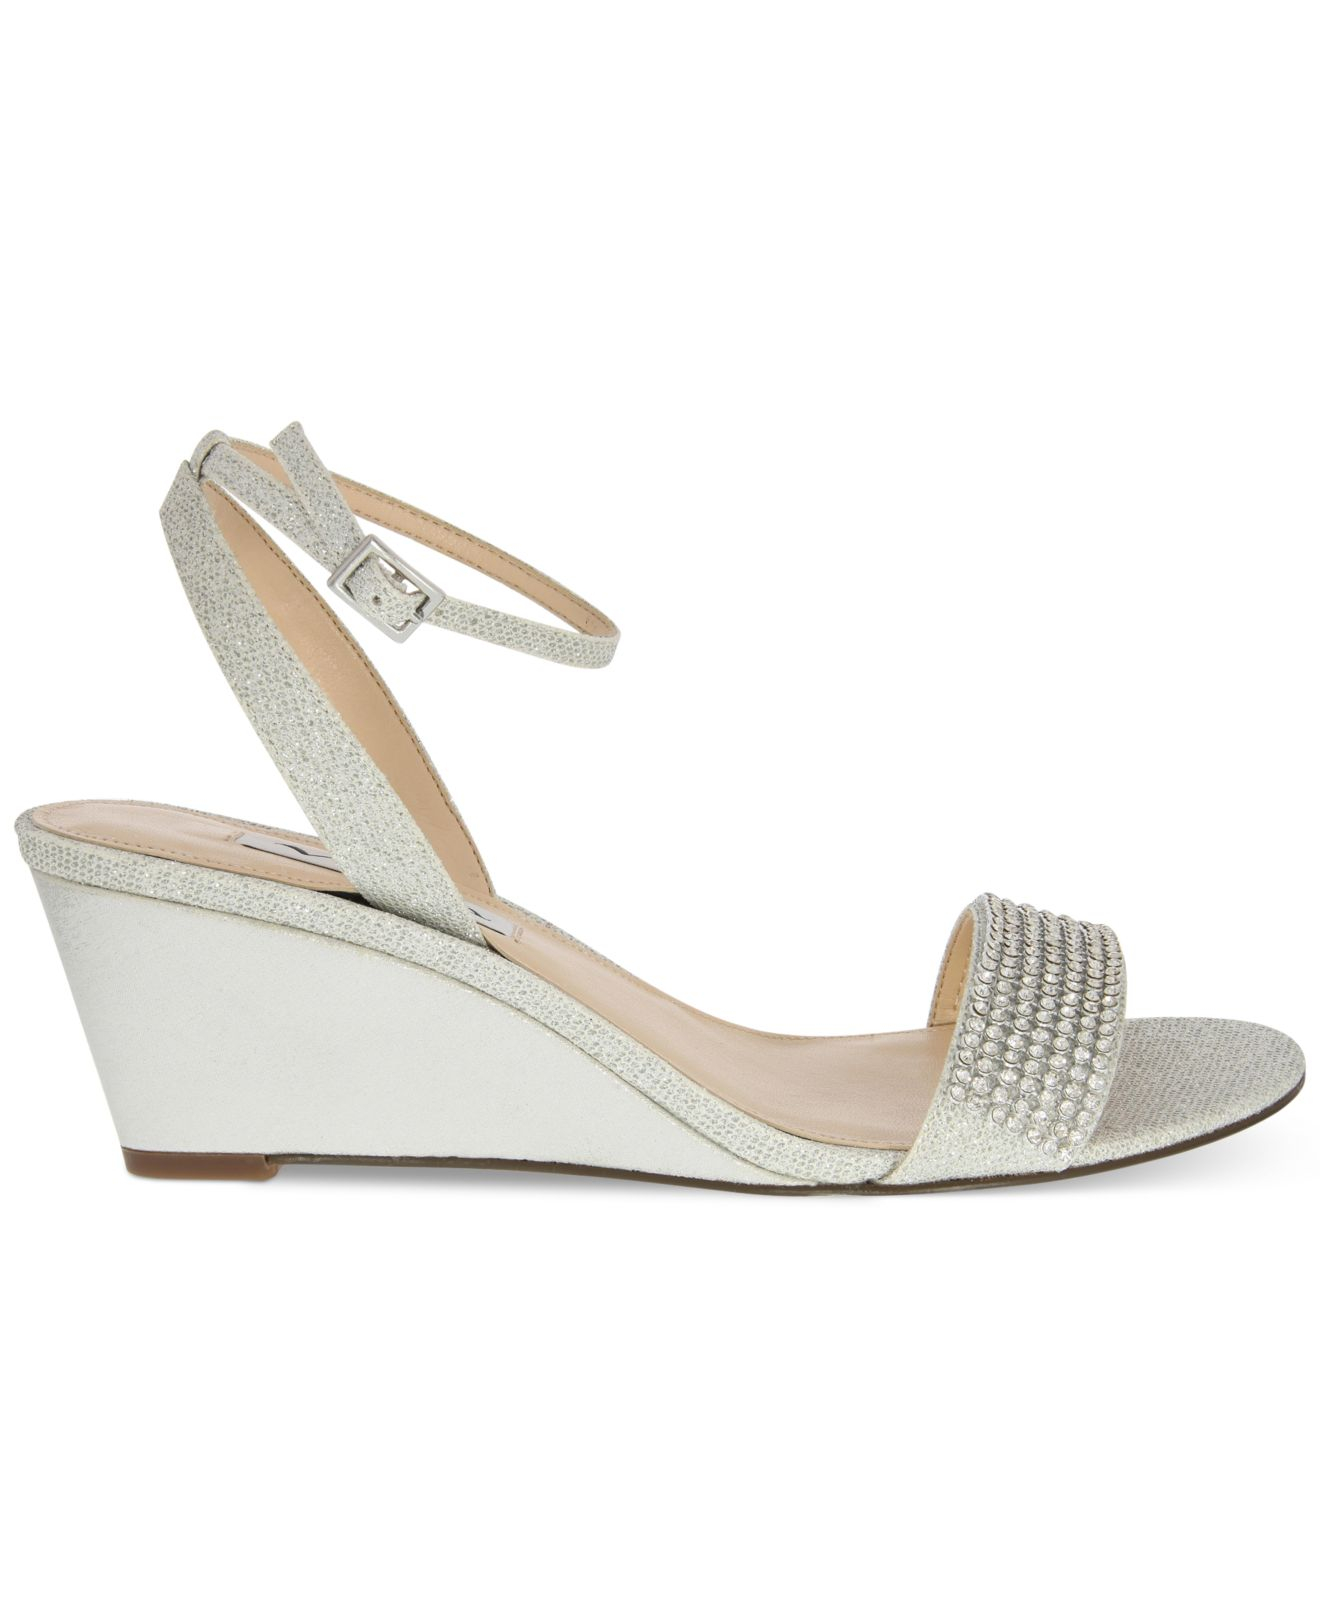 Nina Noely Mid-Wedge Evening Sandals in Silver (Metallic) - Lyst